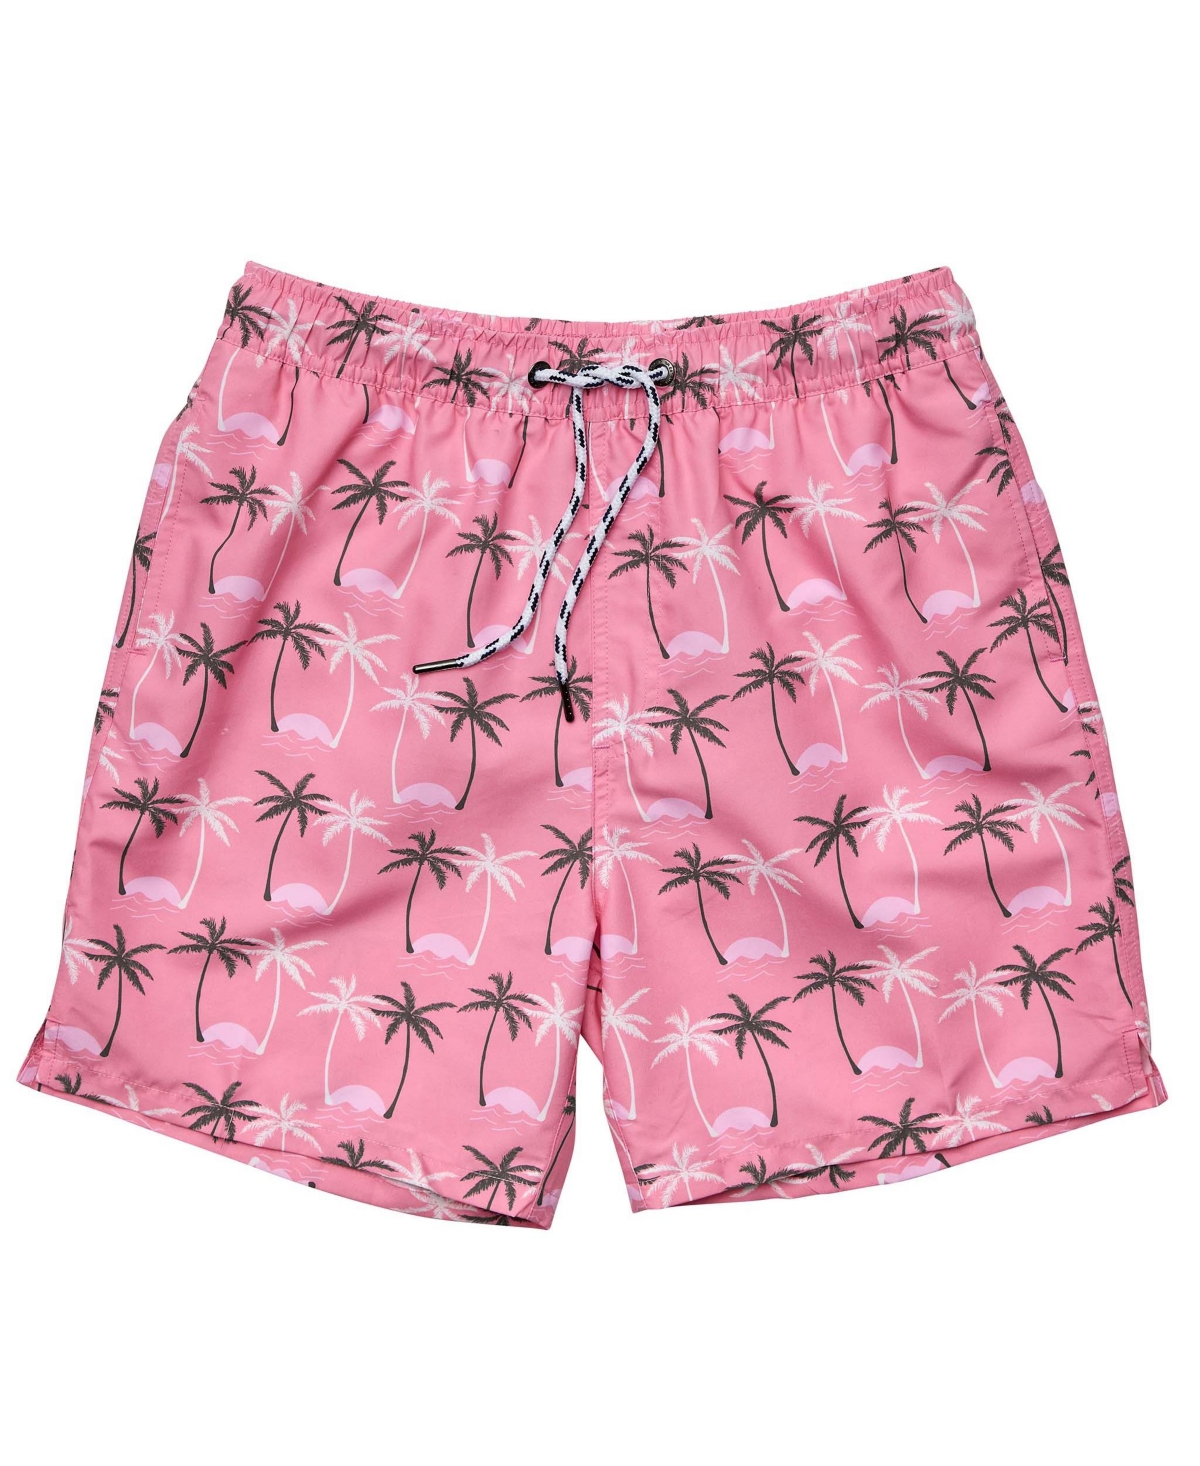 Men's Palm Paradise Sustainable Volley Board Short - Pink